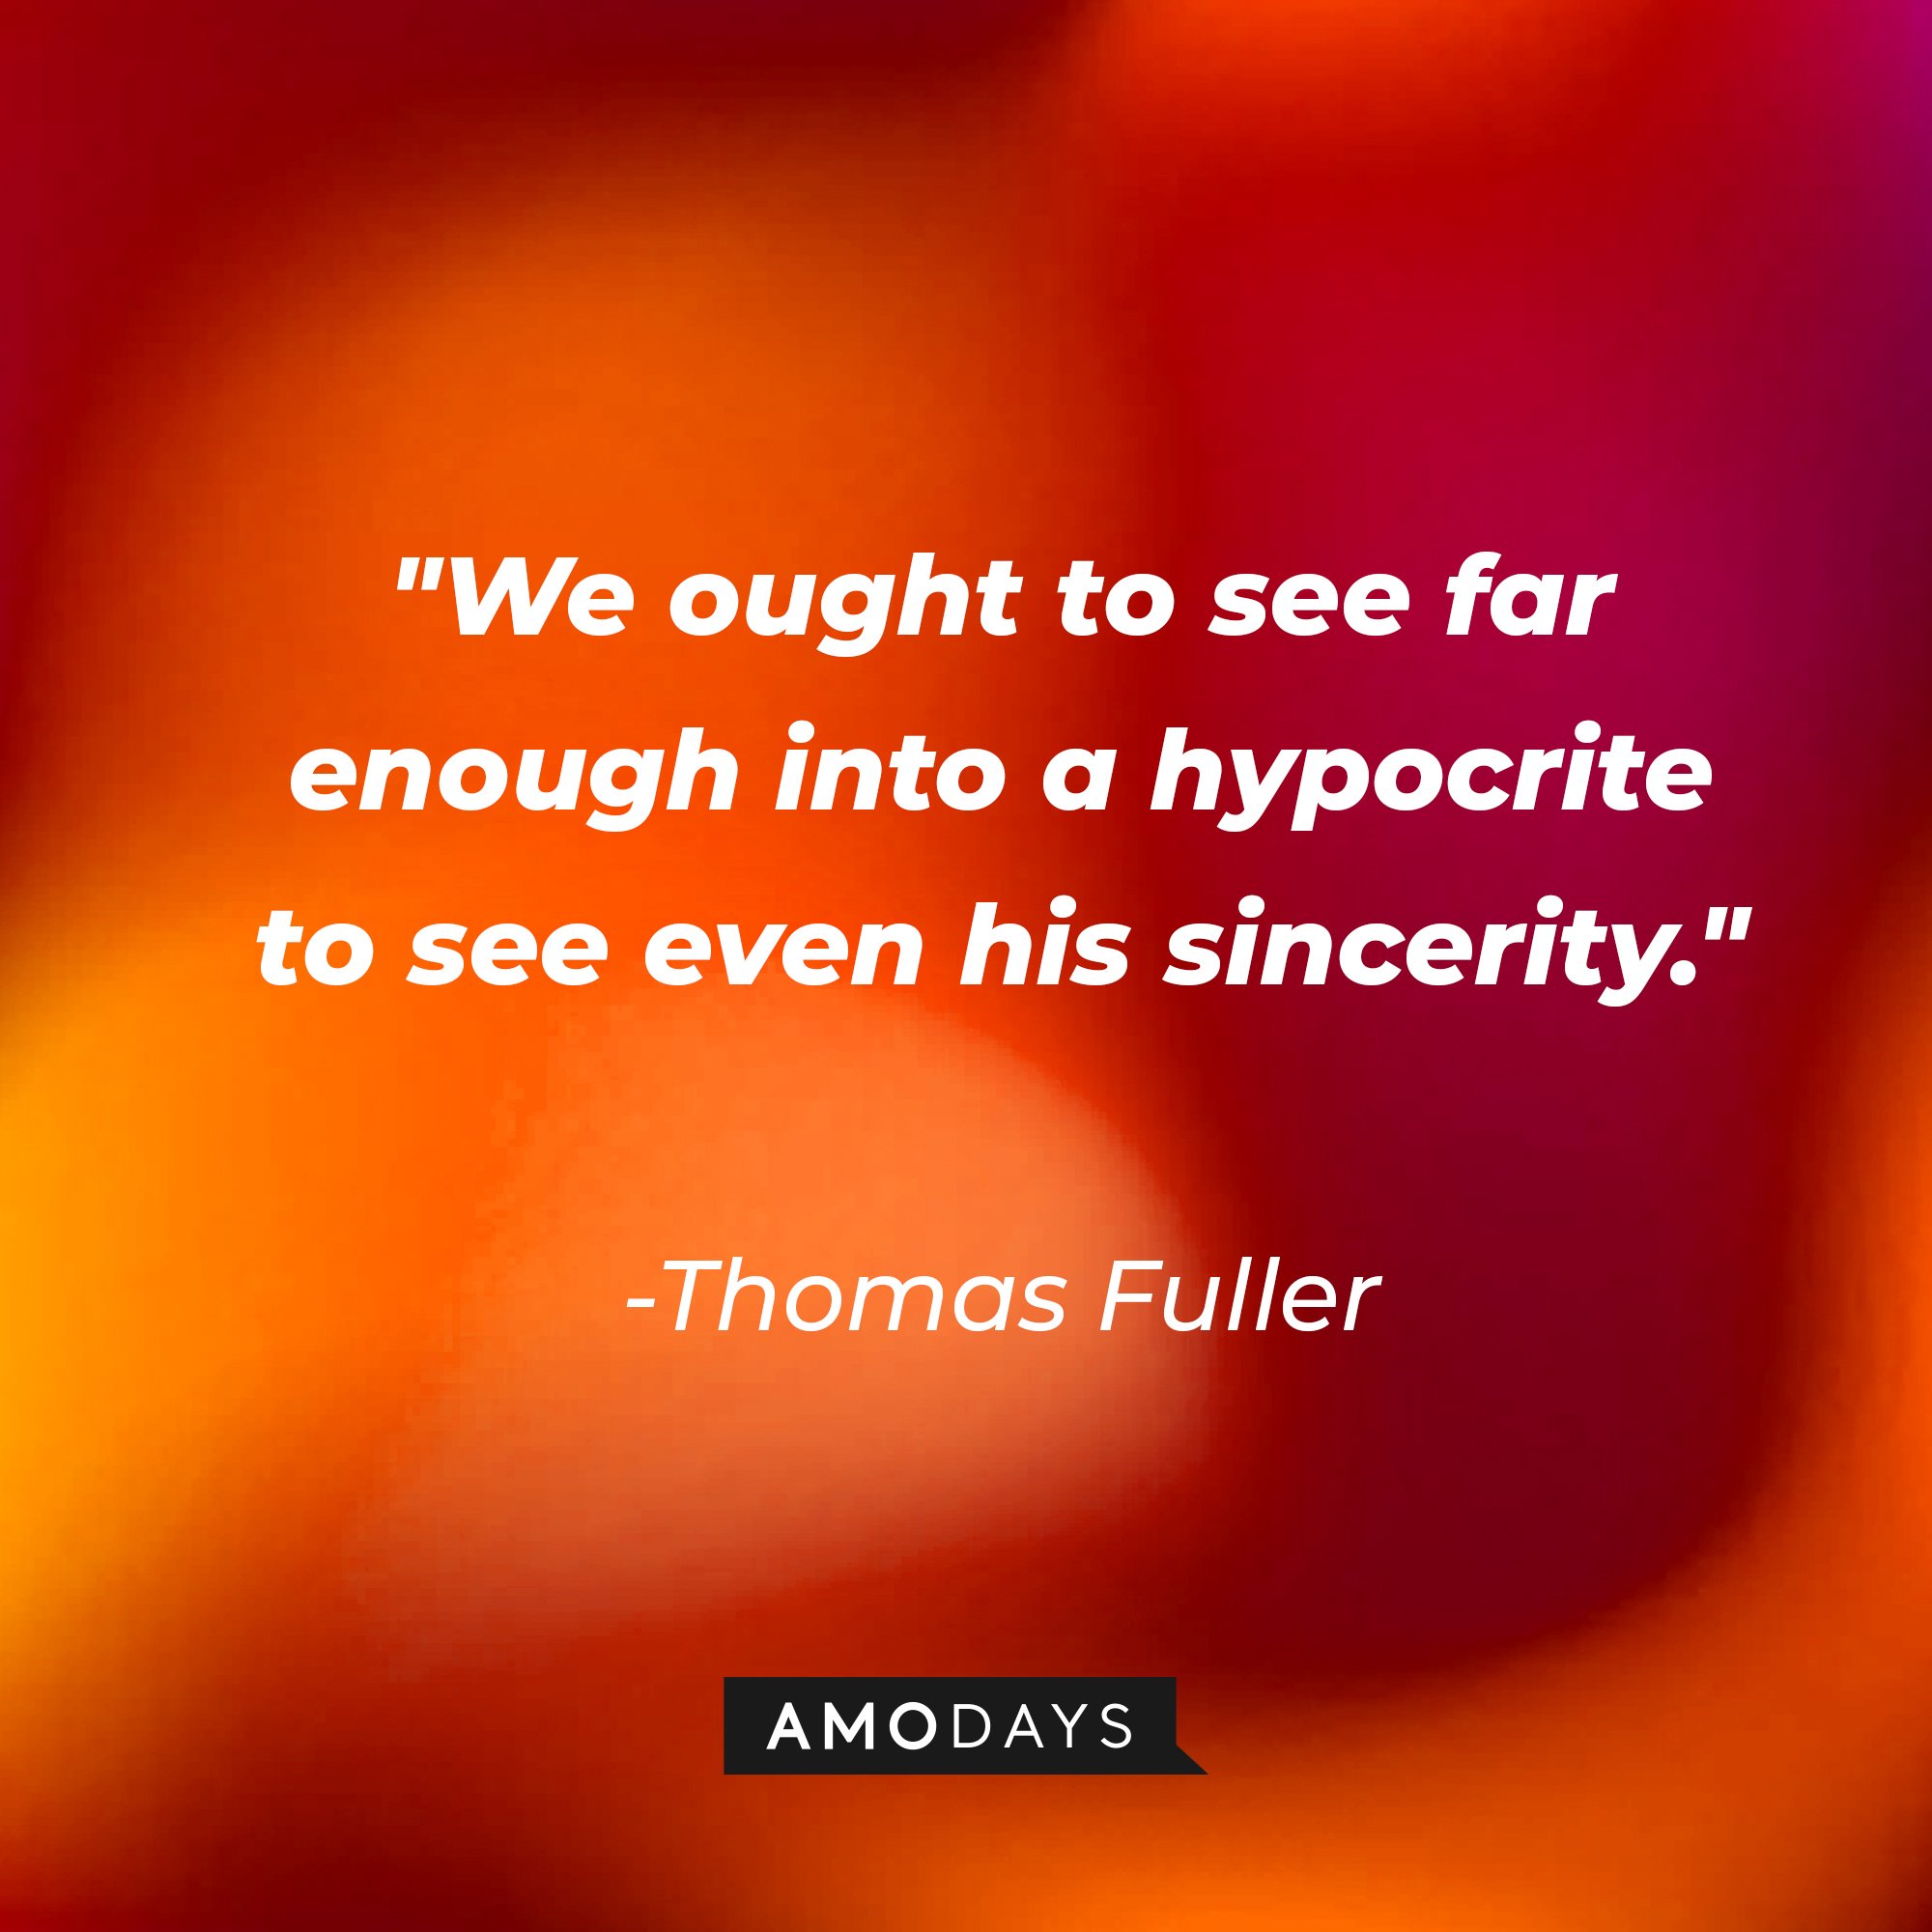 Thomas Fuller's quote:\\\\\\\\\\\\\\\\u00a0"We ought to see far enough into a hypocrite to see even his sincerity."\\\\\\\\\\\\\\\\u00a0| Image: AmoDays